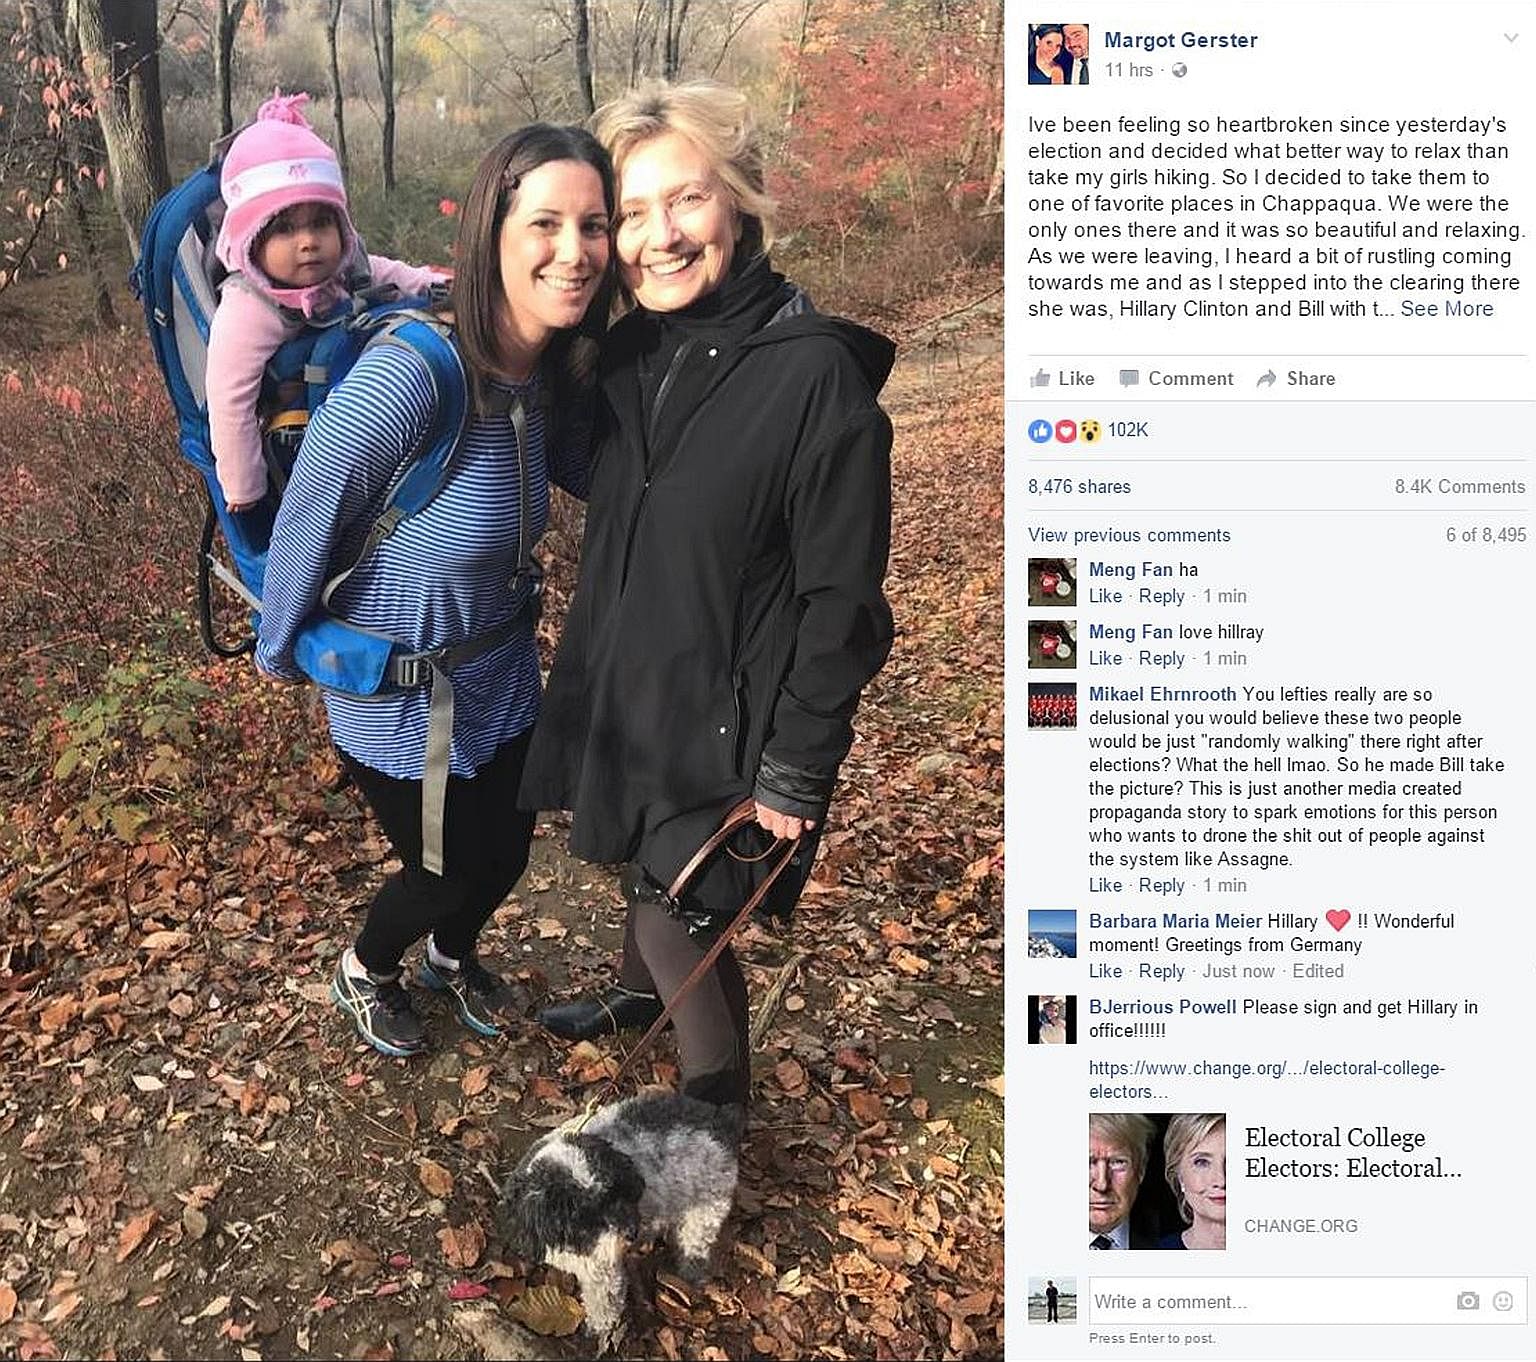 Ms Gerster posted a photo of her chance meeting with Mrs Clinton during a hike in Chappaqua, New York, on Thursday, to "make people smile".